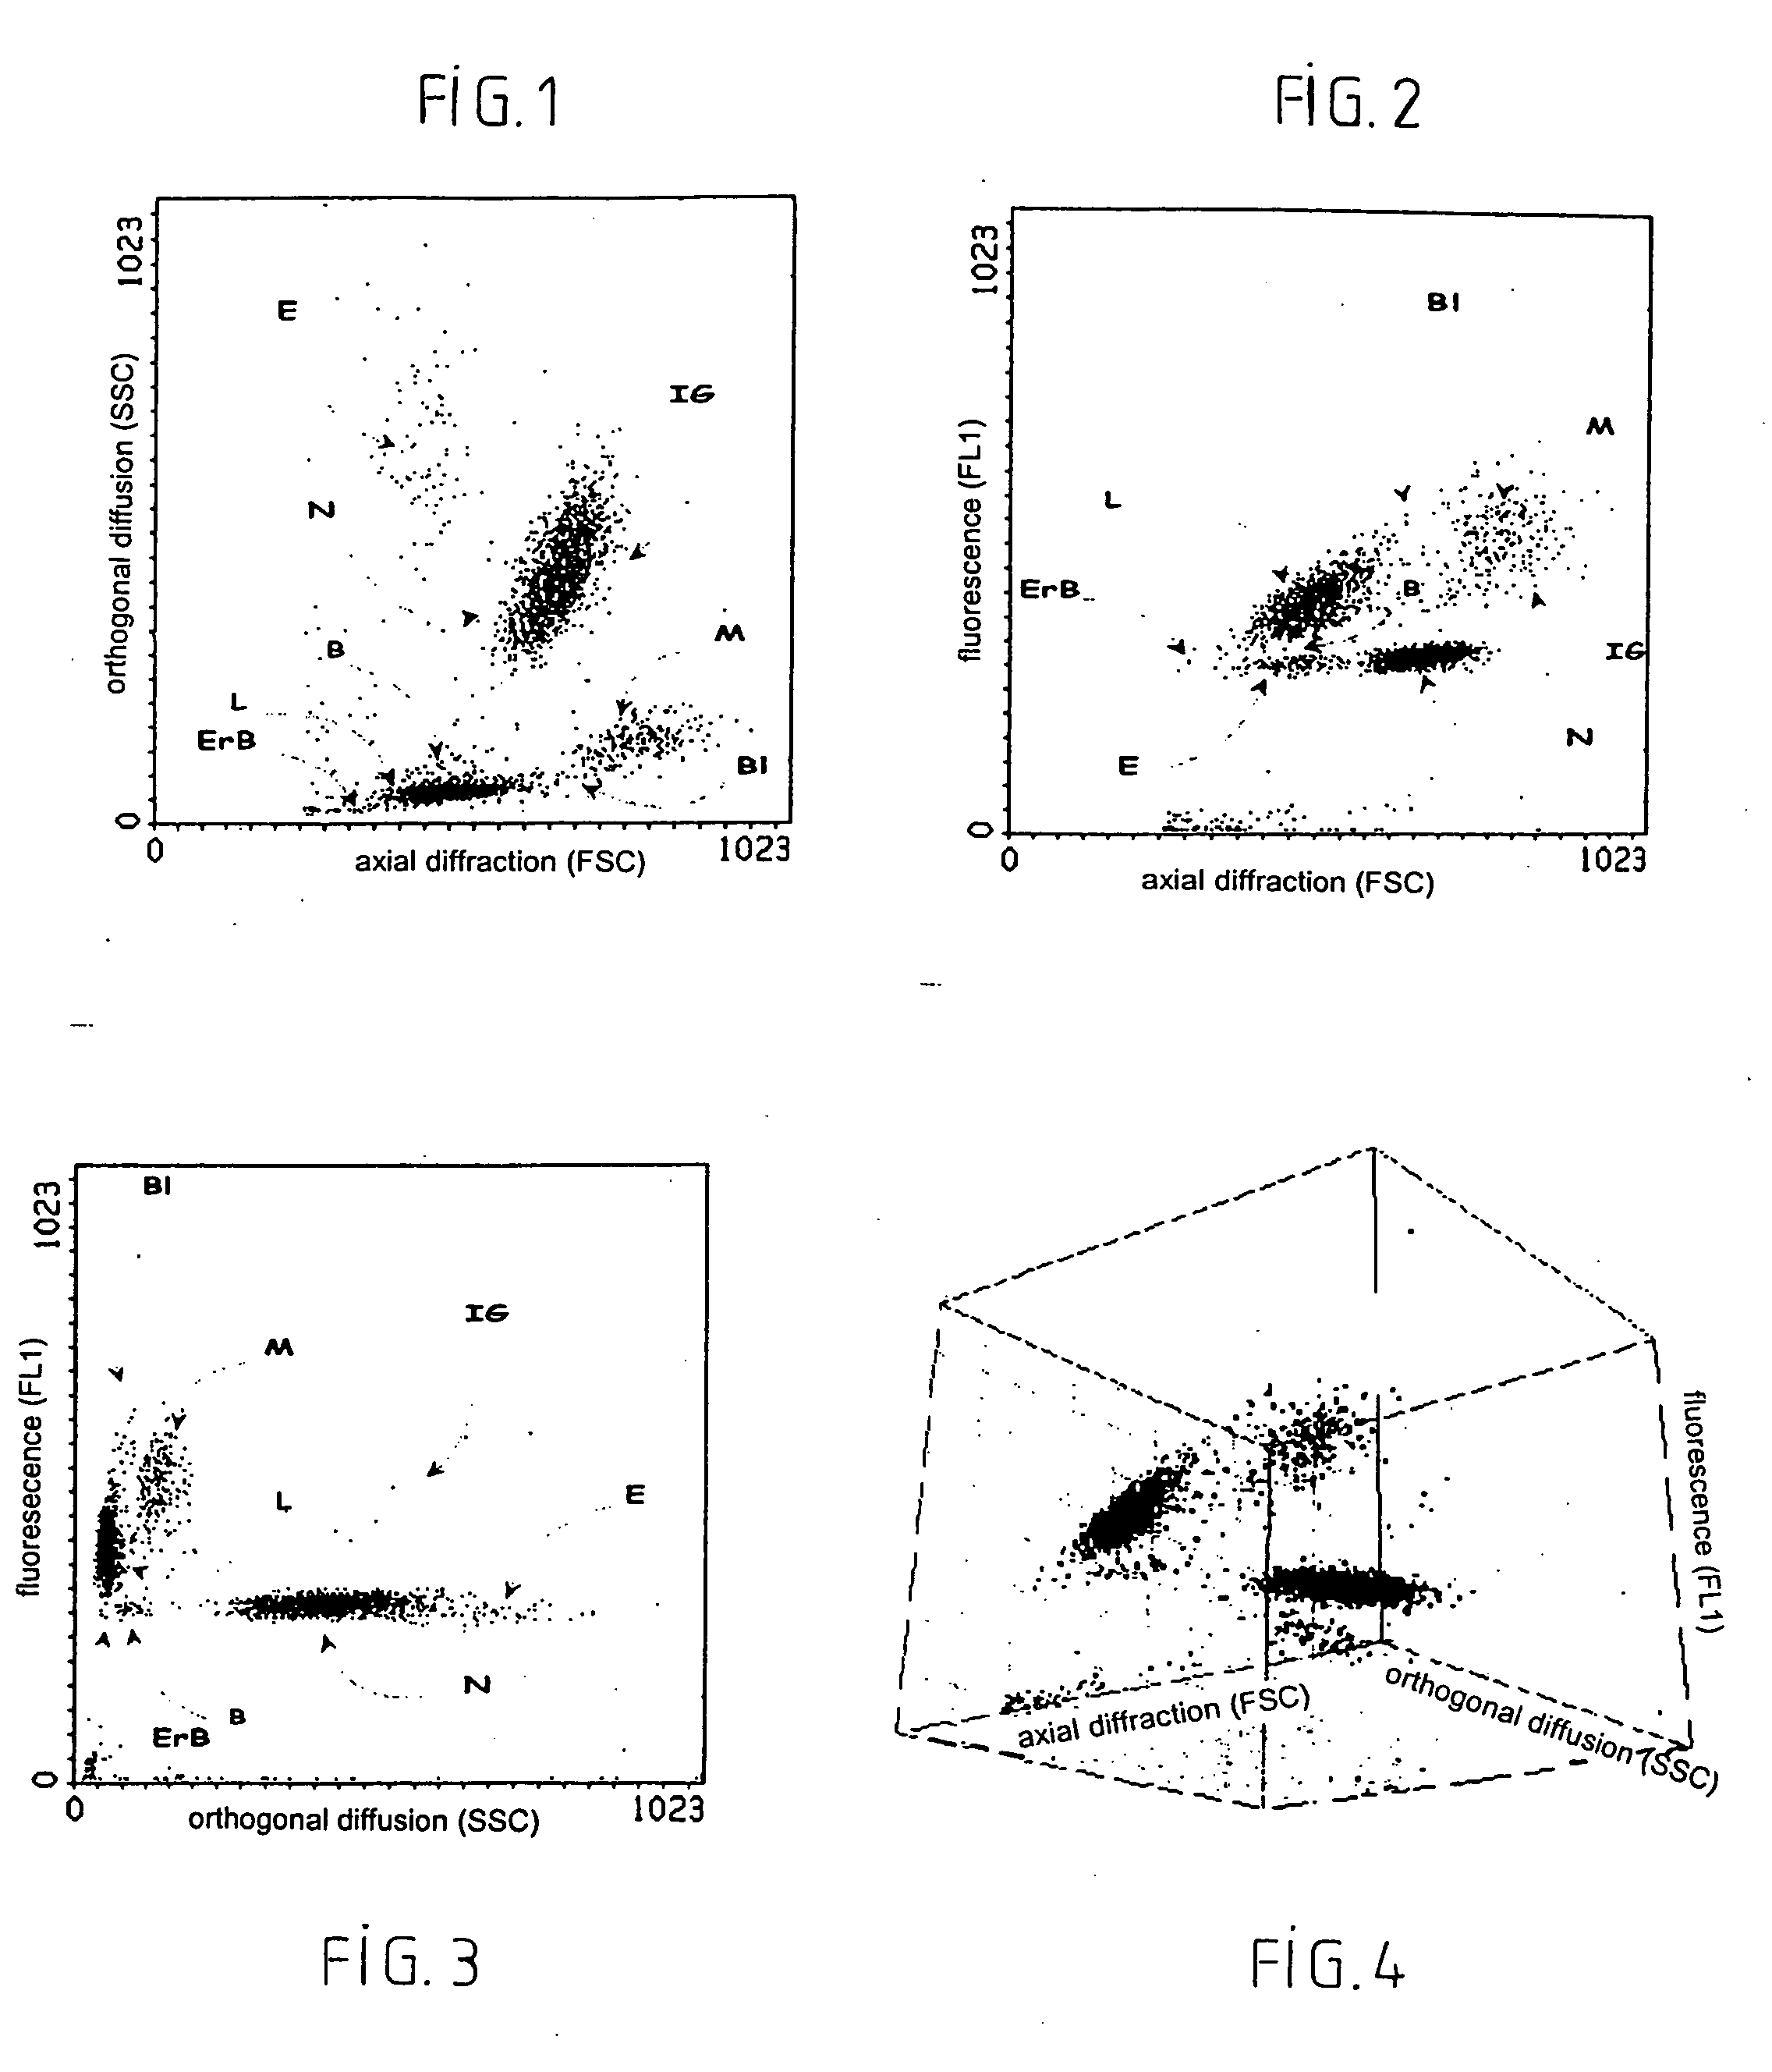 Reagent and process for the identification and counting of biological cells